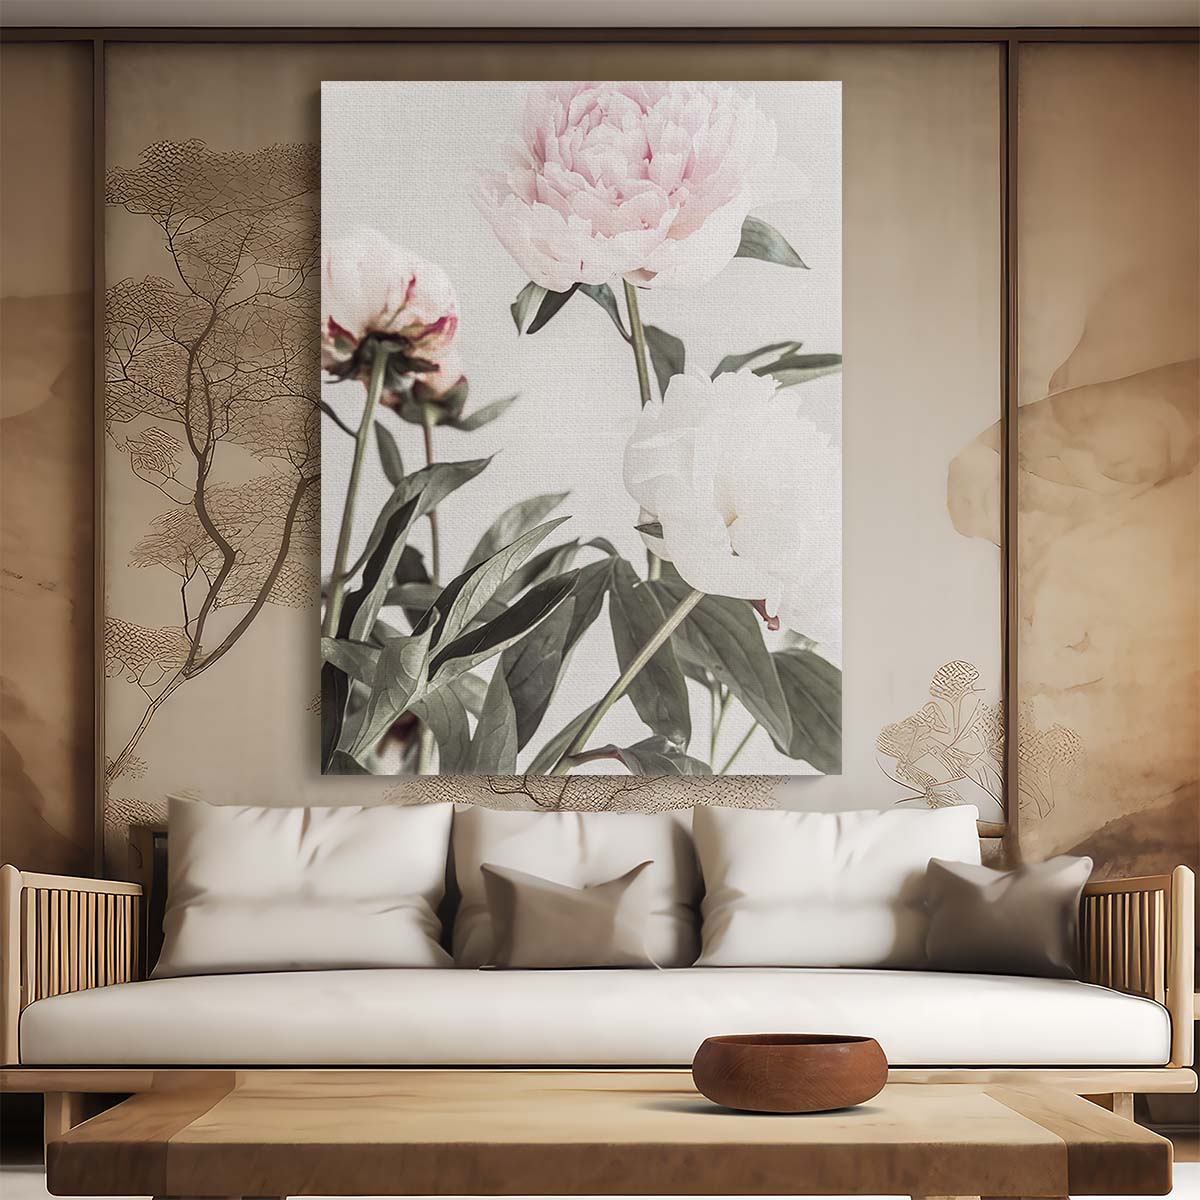 Botanical Peony Flowers Photography White & Pink Floral Still Life by Luxuriance Designs, made in USA